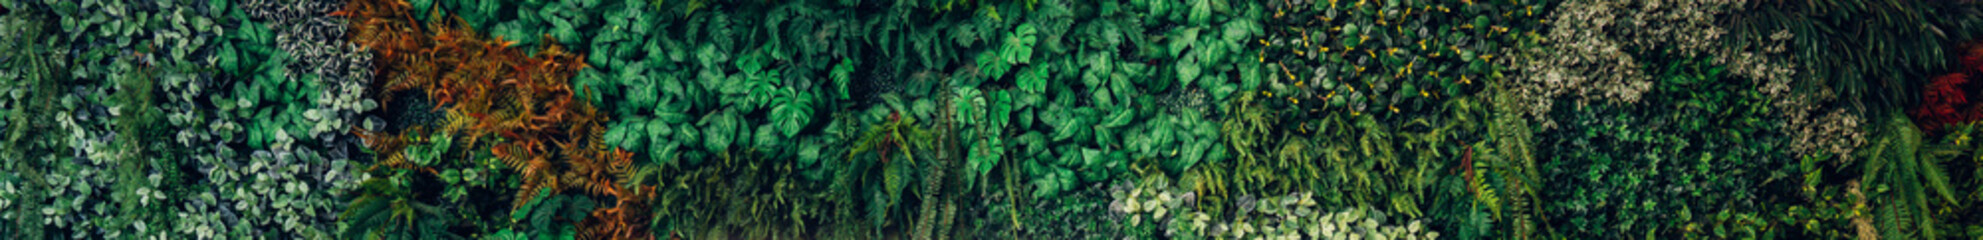 Close up group of background green leaves texture and Abstract Nature Background. Lush Foliage Textures. Exotic Greenery and Botanical Patterns.